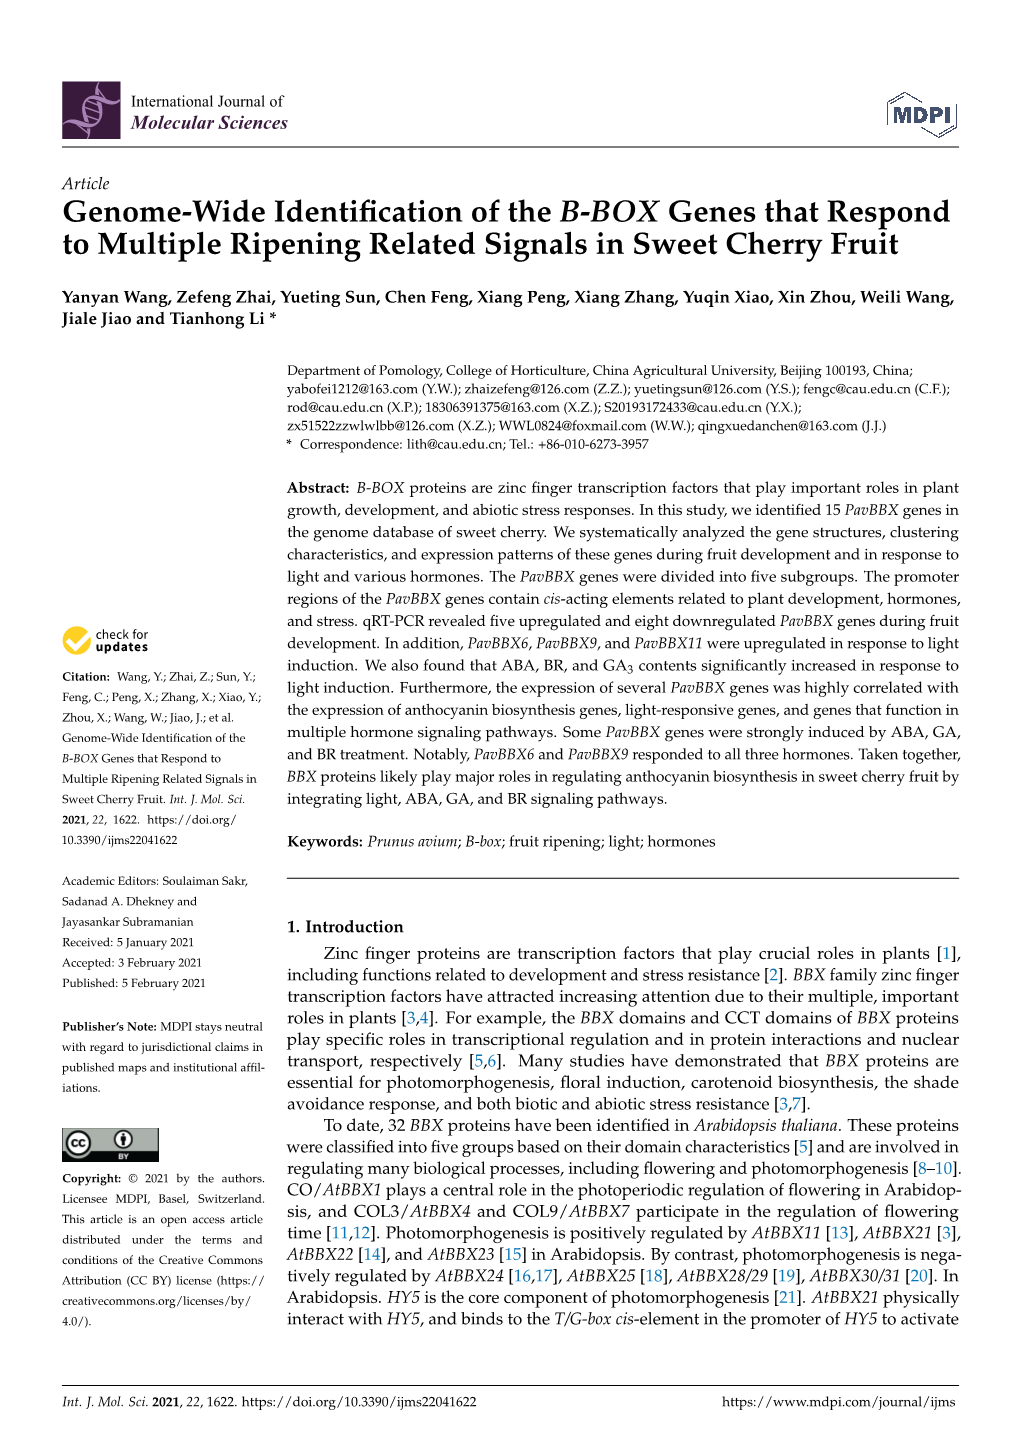 Genome-Wide Identification of the B-BOX Genes That Respond to Multiple Ripening Related Signals in Sweet Cherry Fruit